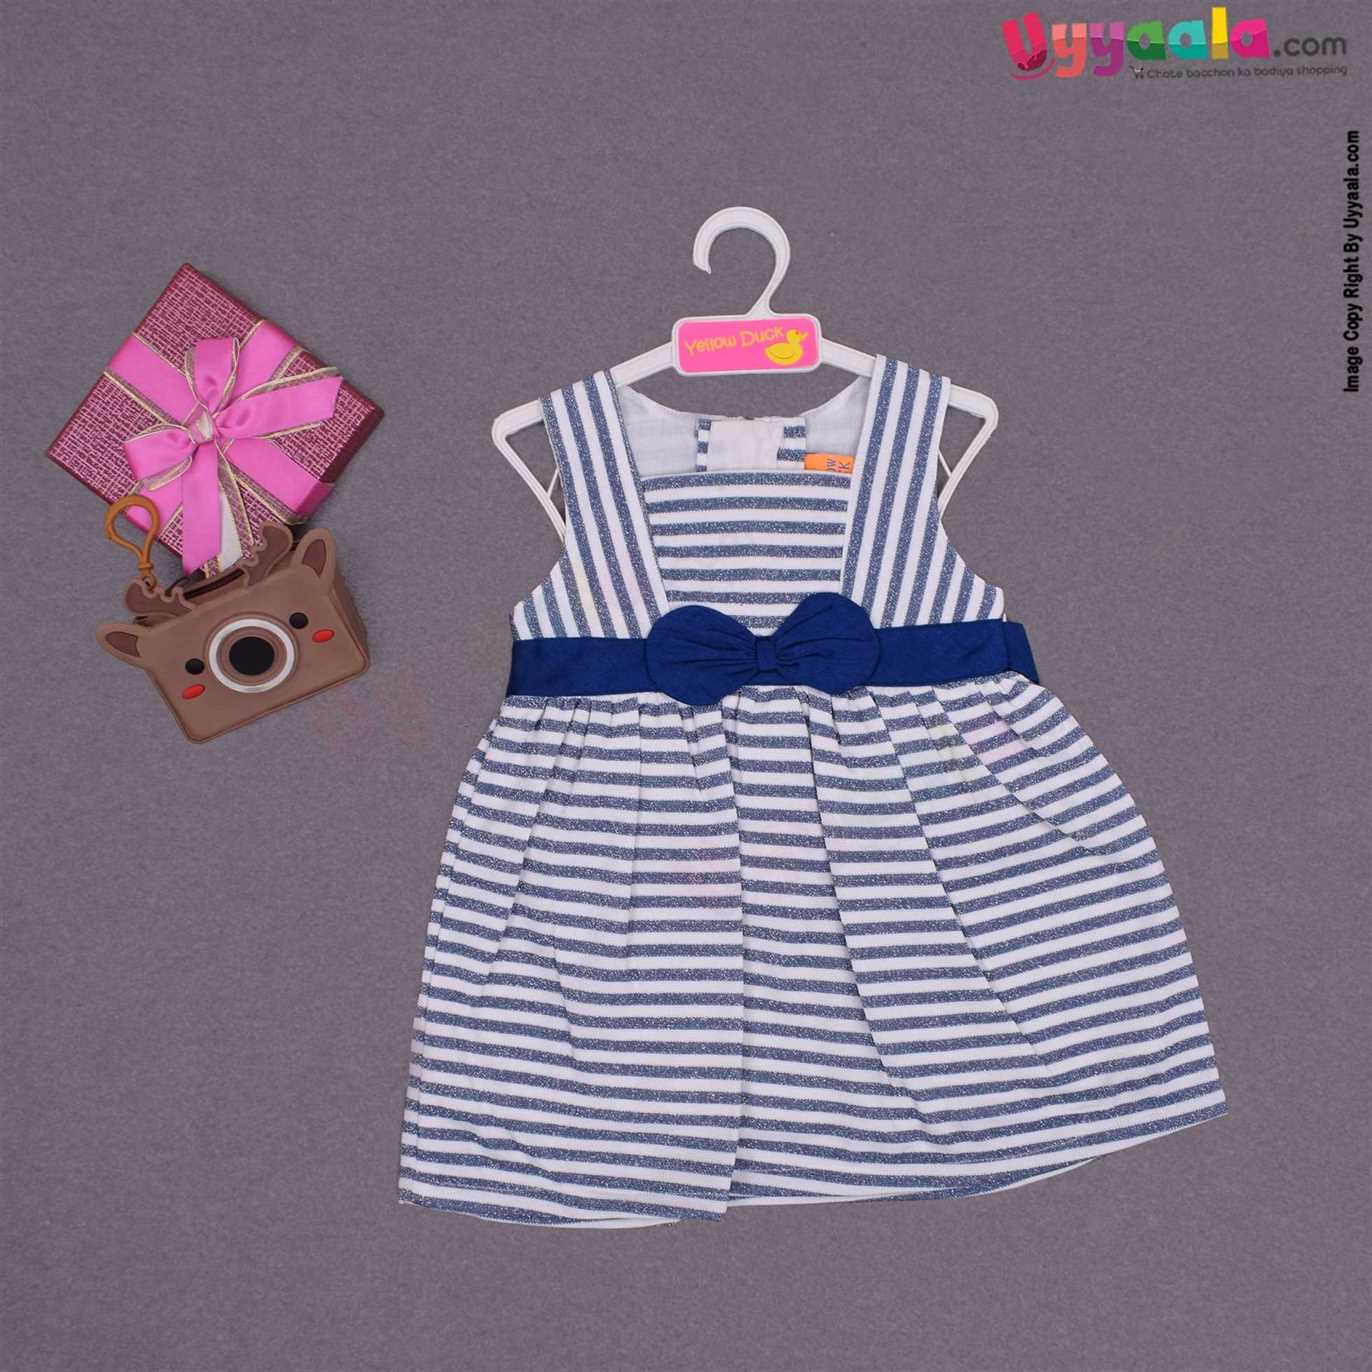 Sleeveless party wear frock for baby girl